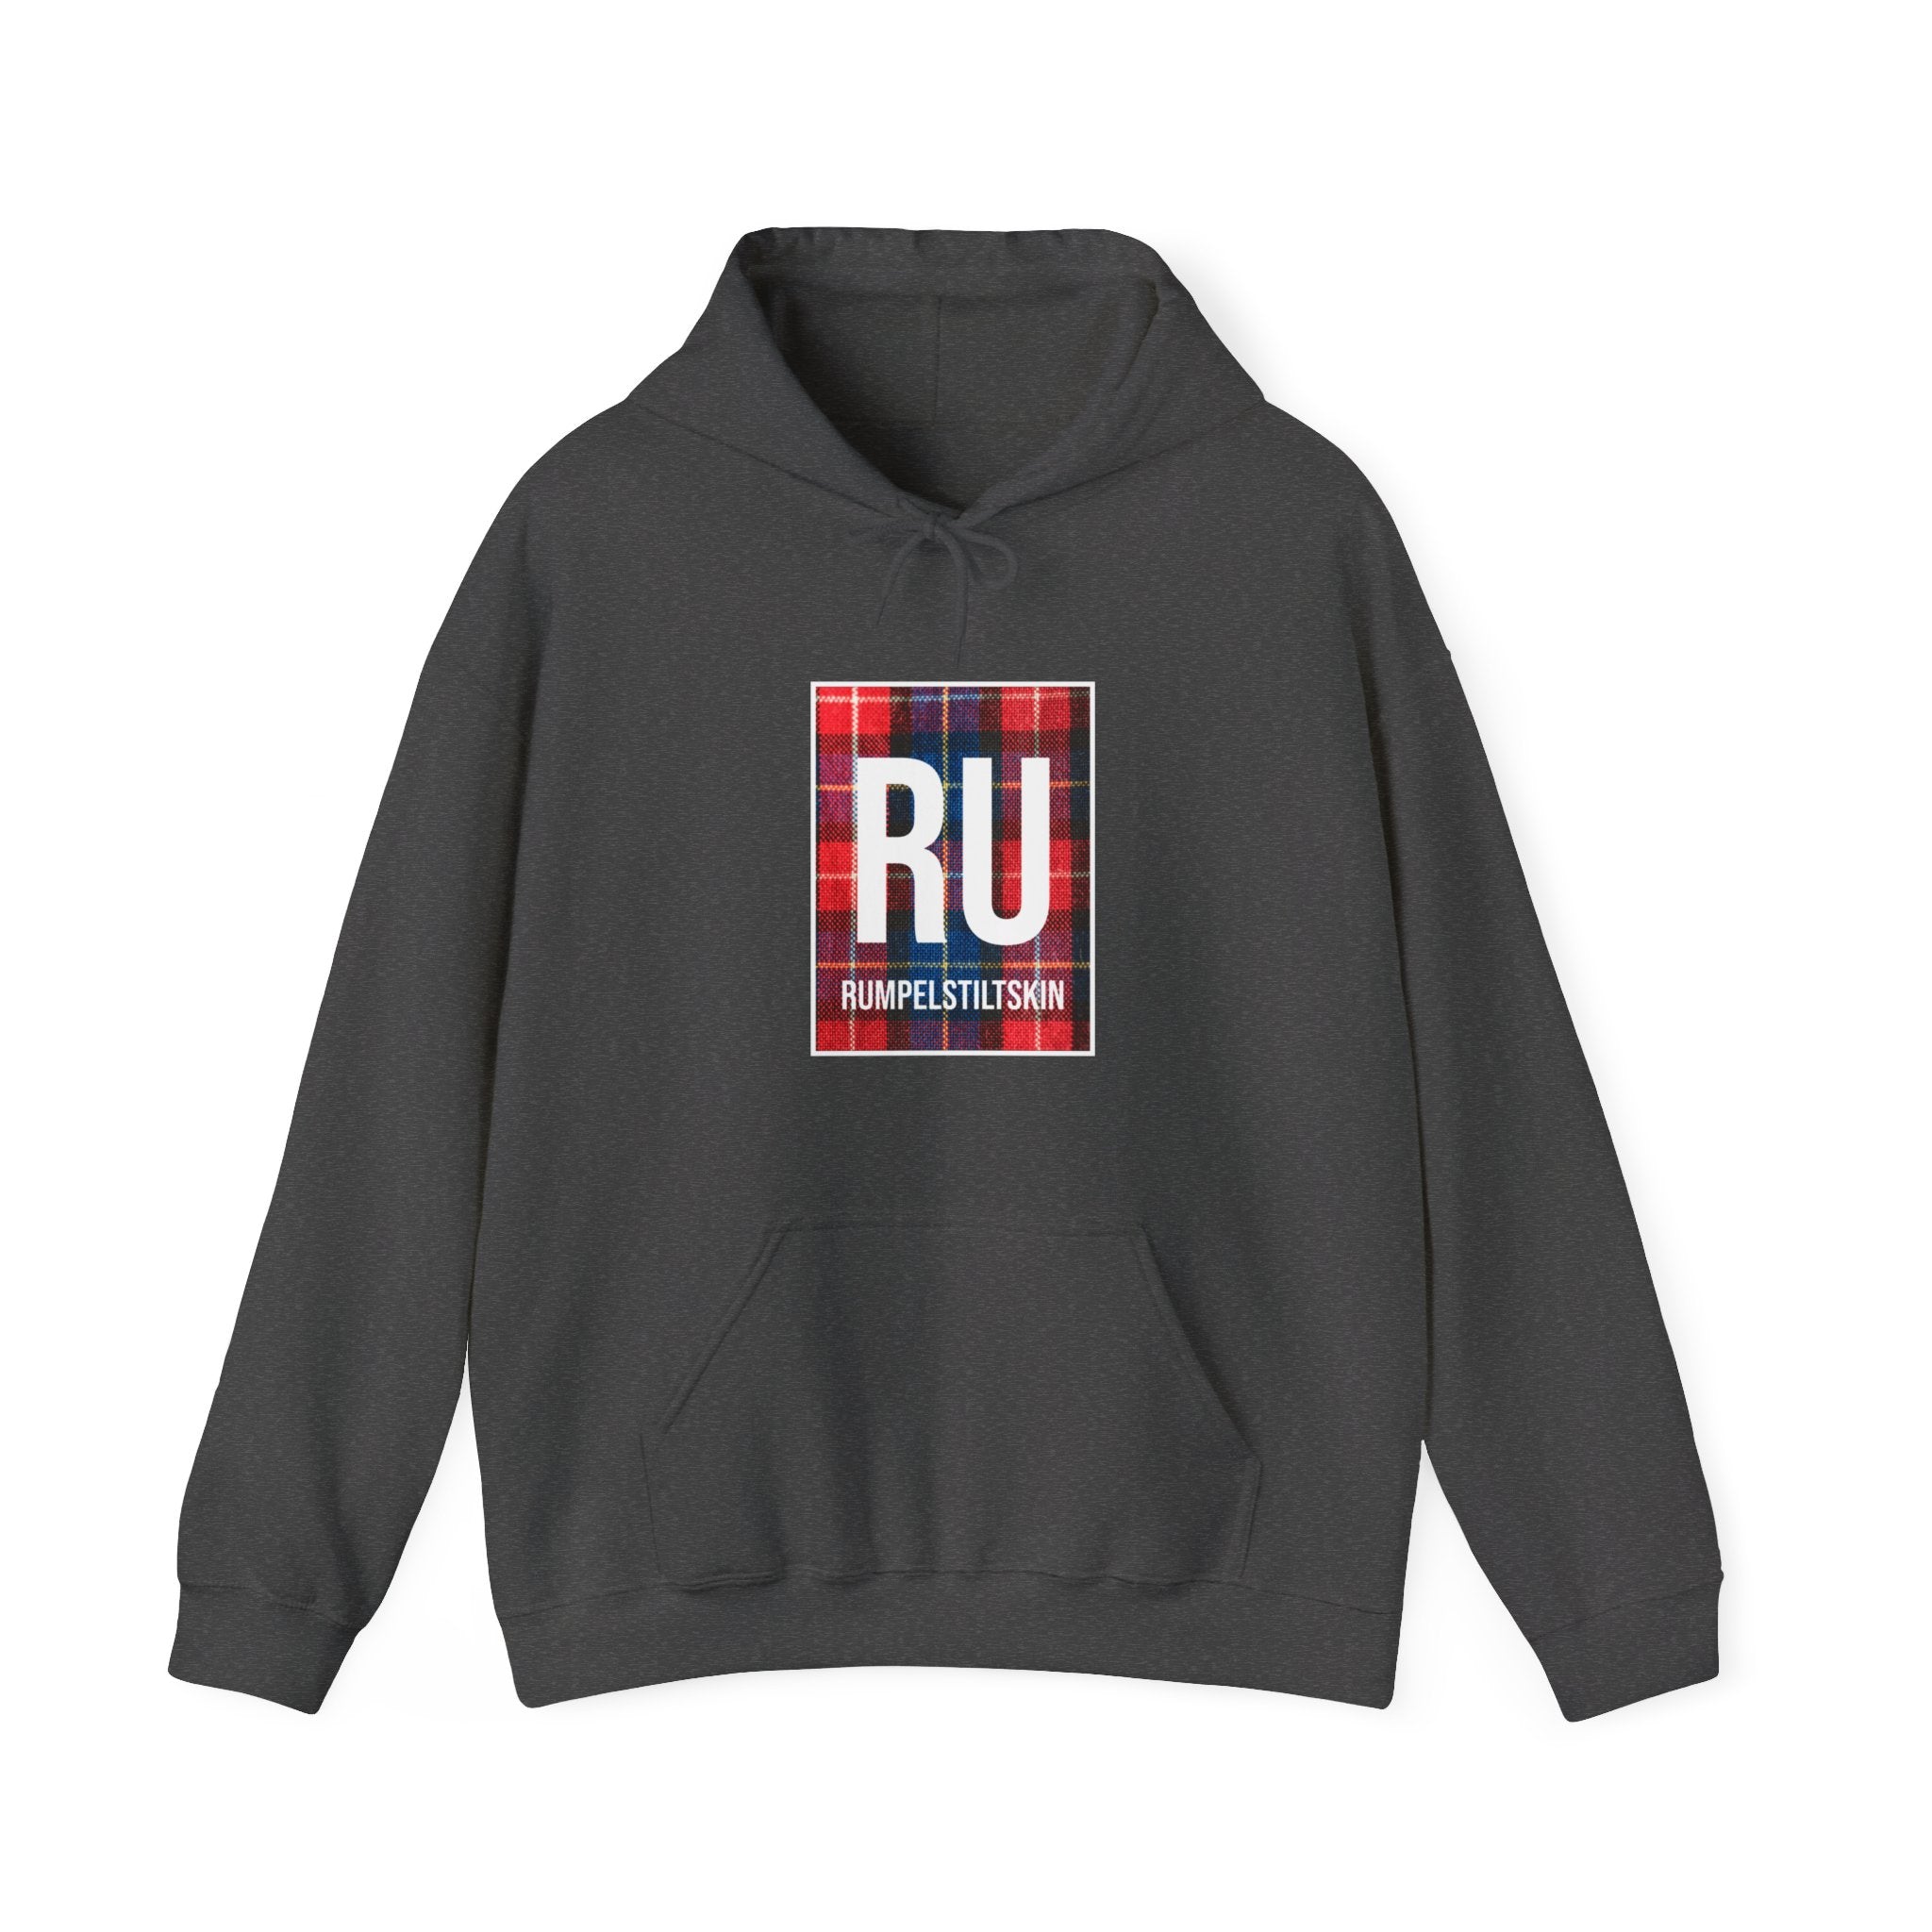 Black RU - Hooded Sweatshirt with a front pocket, featuring a stylish "Rumpelstiltskin" plaid graphic on the chest. Designed for ultimate comfort and effortless style.